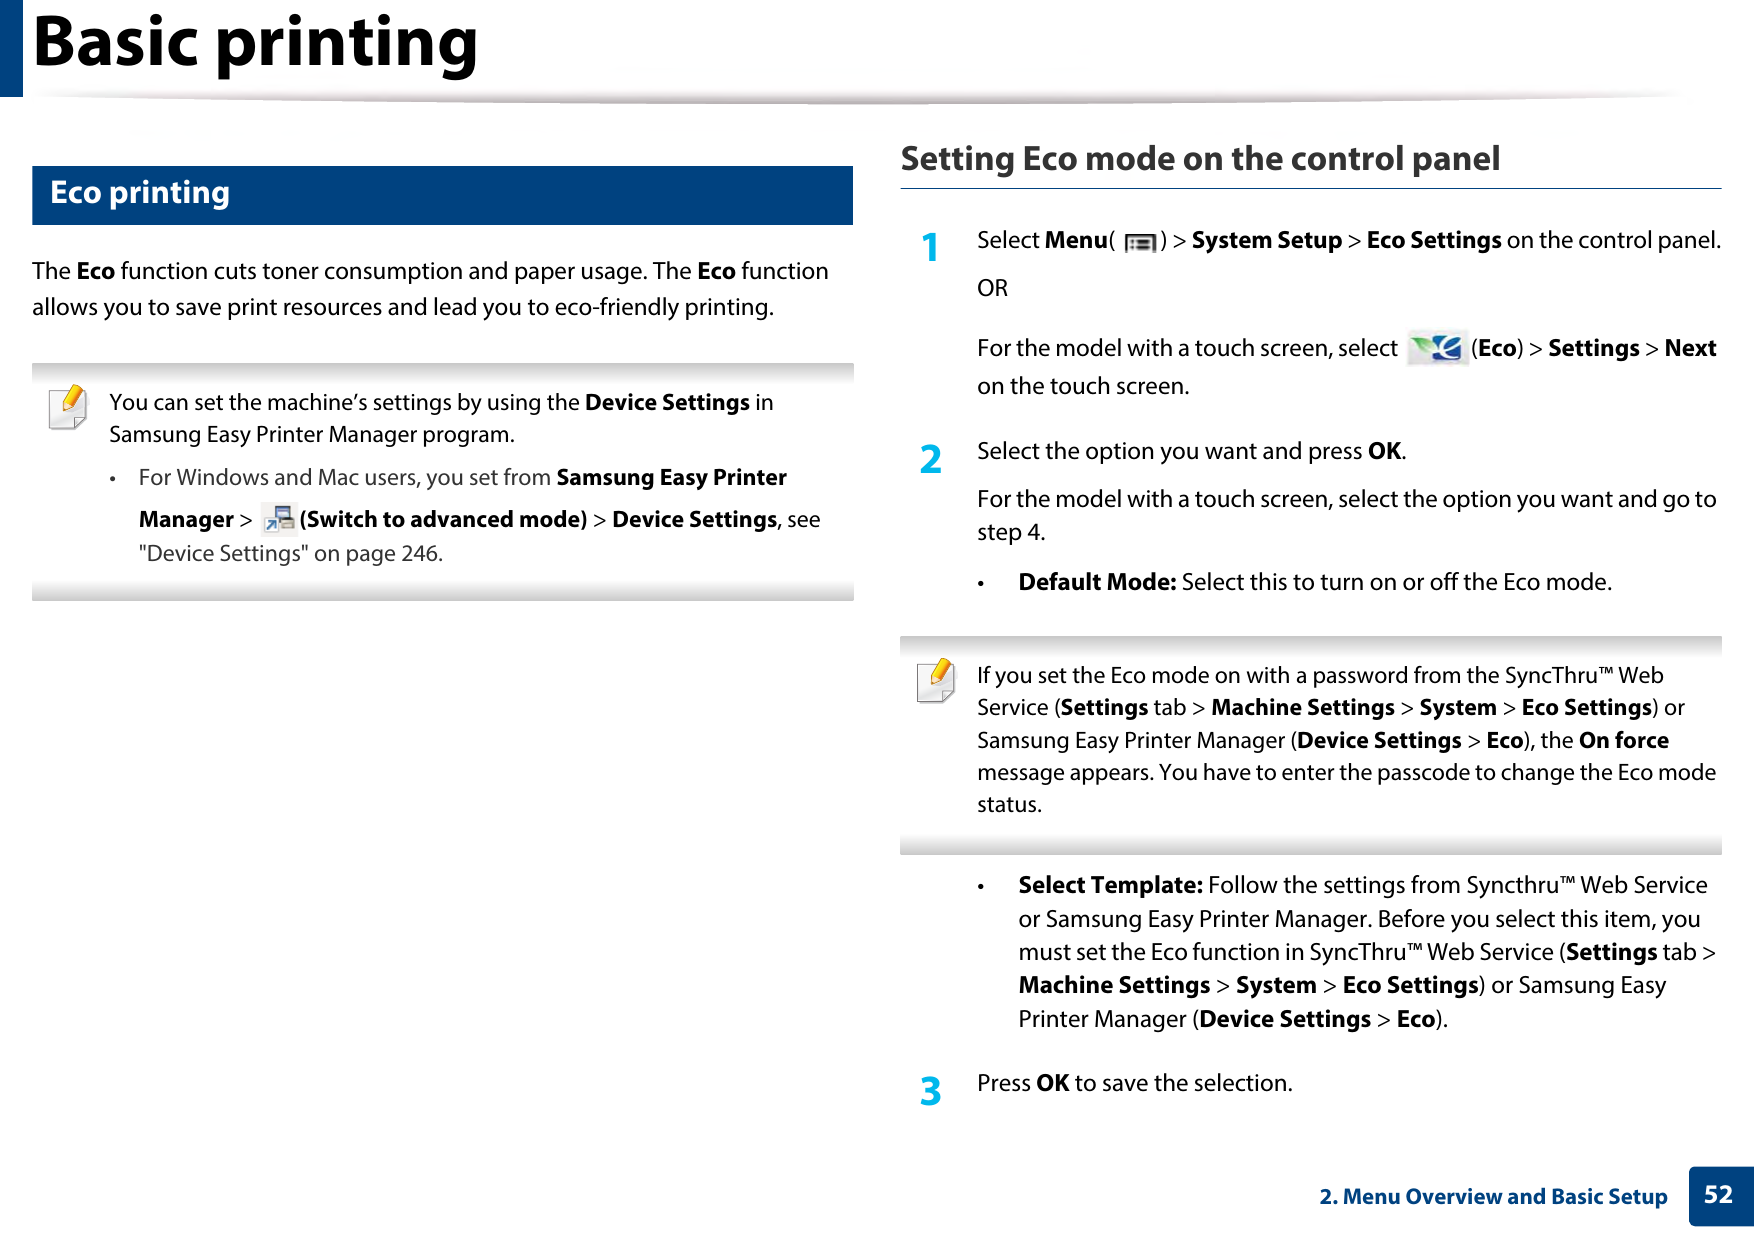 Basic printing522. Menu Overview and Basic Setup13 Eco printingThe Eco function cuts toner consumption and paper usage. The Eco function allows you to save print resources and lead you to eco-friendly printing. You can set the machine’s settings by using the Device Settings in Samsung Easy Printer Manager program.• For Windows and Mac users, you set from Samsung Easy Printer Manager &gt;  (Switch to advanced mode) &gt; Device Settings, see &quot;Device Settings&quot; on page 246. Setting Eco mode on the control panel1Select Menu() &gt; System Setup &gt; Eco Settings on the control panel.ORFor the model with a touch screen, select  (Eco) &gt; Settings &gt; Next on the touch screen.2  Select the option you want and press OK.For the model with a touch screen, select the option you want and go to step 4. •Default Mode: Select this to turn on or off the Eco mode. If you set the Eco mode on with a password from the SyncThru™ Web Service (Settings tab &gt; Machine Settings &gt; System &gt; Eco Settings) or Samsung Easy Printer Manager (Device Settings &gt; Eco), the On force message appears. You have to enter the passcode to change the Eco mode status. •Select Template: Follow the settings from Syncthru™ Web Service or Samsung Easy Printer Manager. Before you select this item, you must set the Eco function in SyncThru™ Web Service (Settings tab &gt; Machine Settings &gt; System &gt; Eco Settings) or Samsung Easy Printer Manager (Device Settings &gt; Eco). 3  Press OK to save the selection.